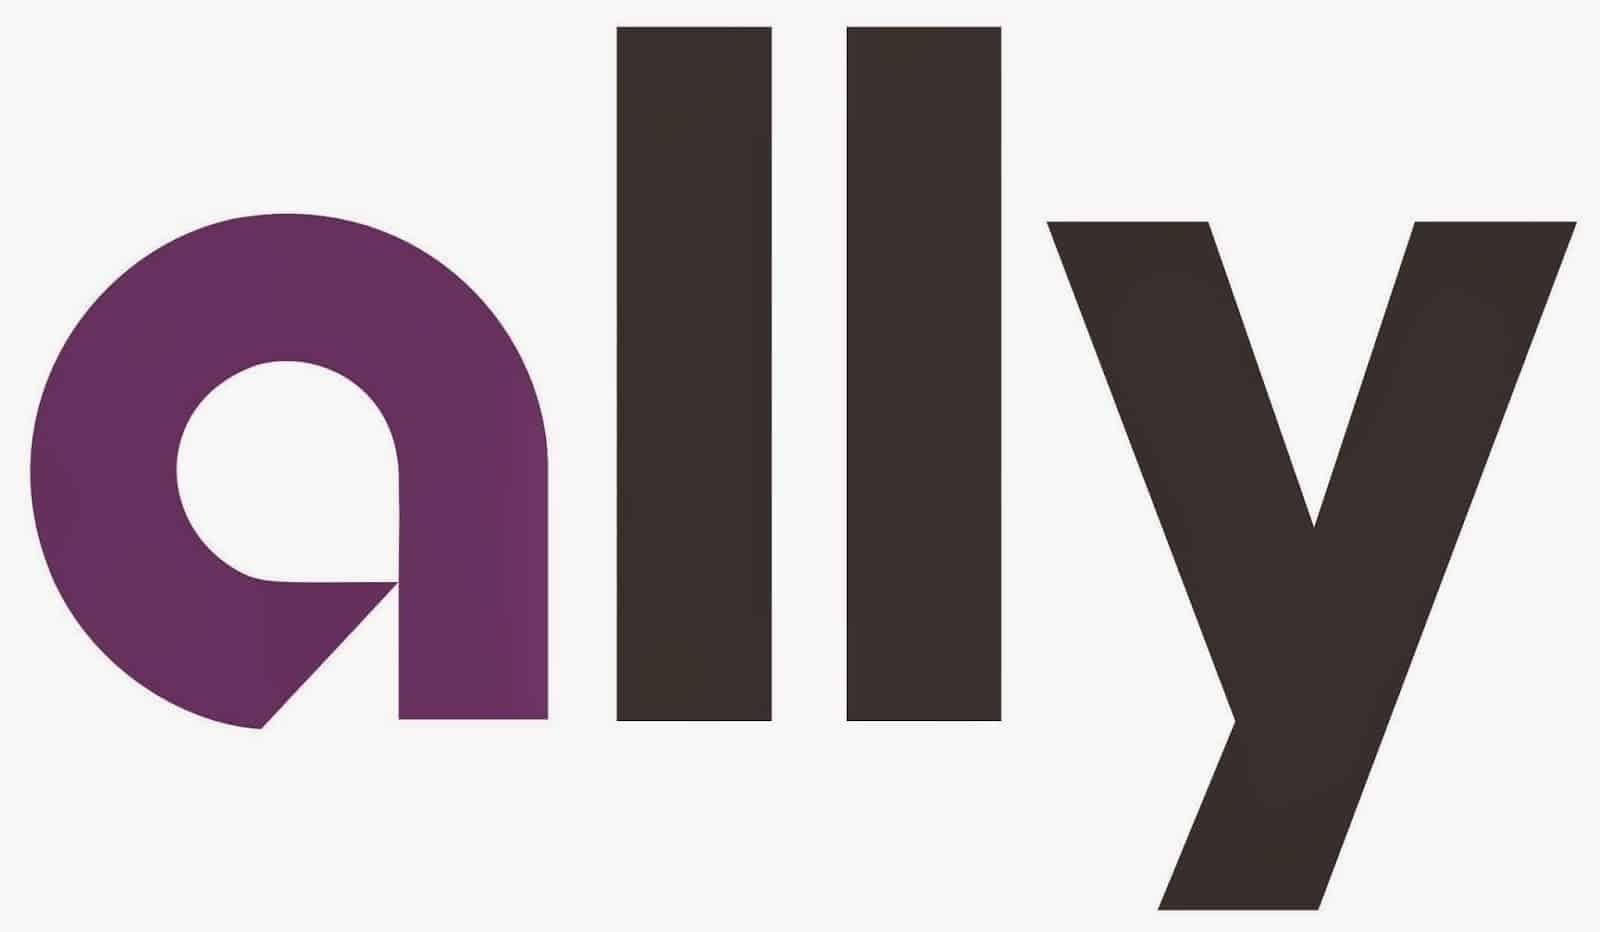 Ally trader app in purple and black colors